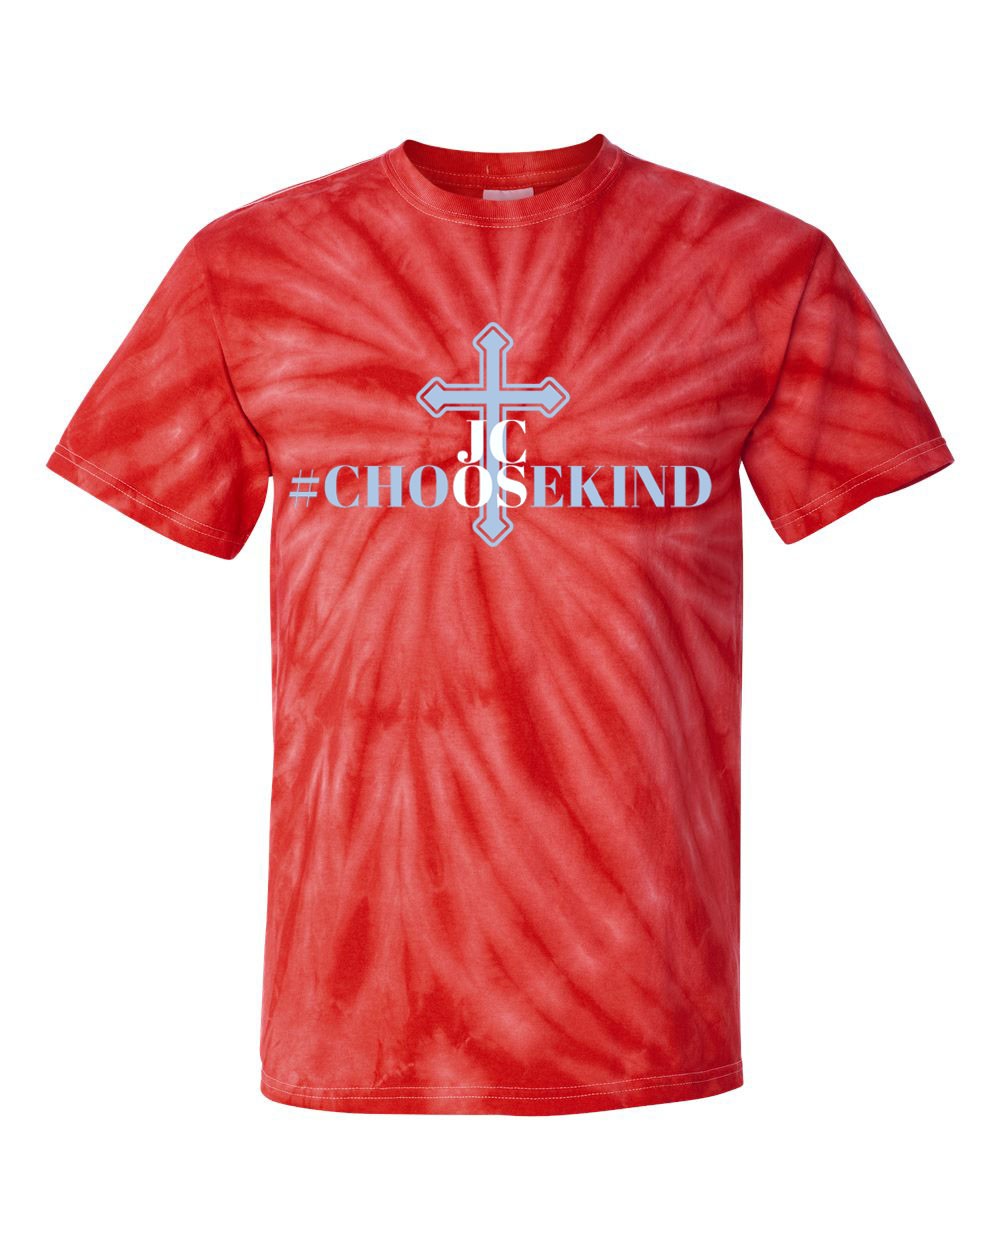 JCOS Staff S/S Tie Dye T-Shirt w/ Choose Kindness Logo #F28-F31 - Please Allow 2-3 Weeks for Delivery